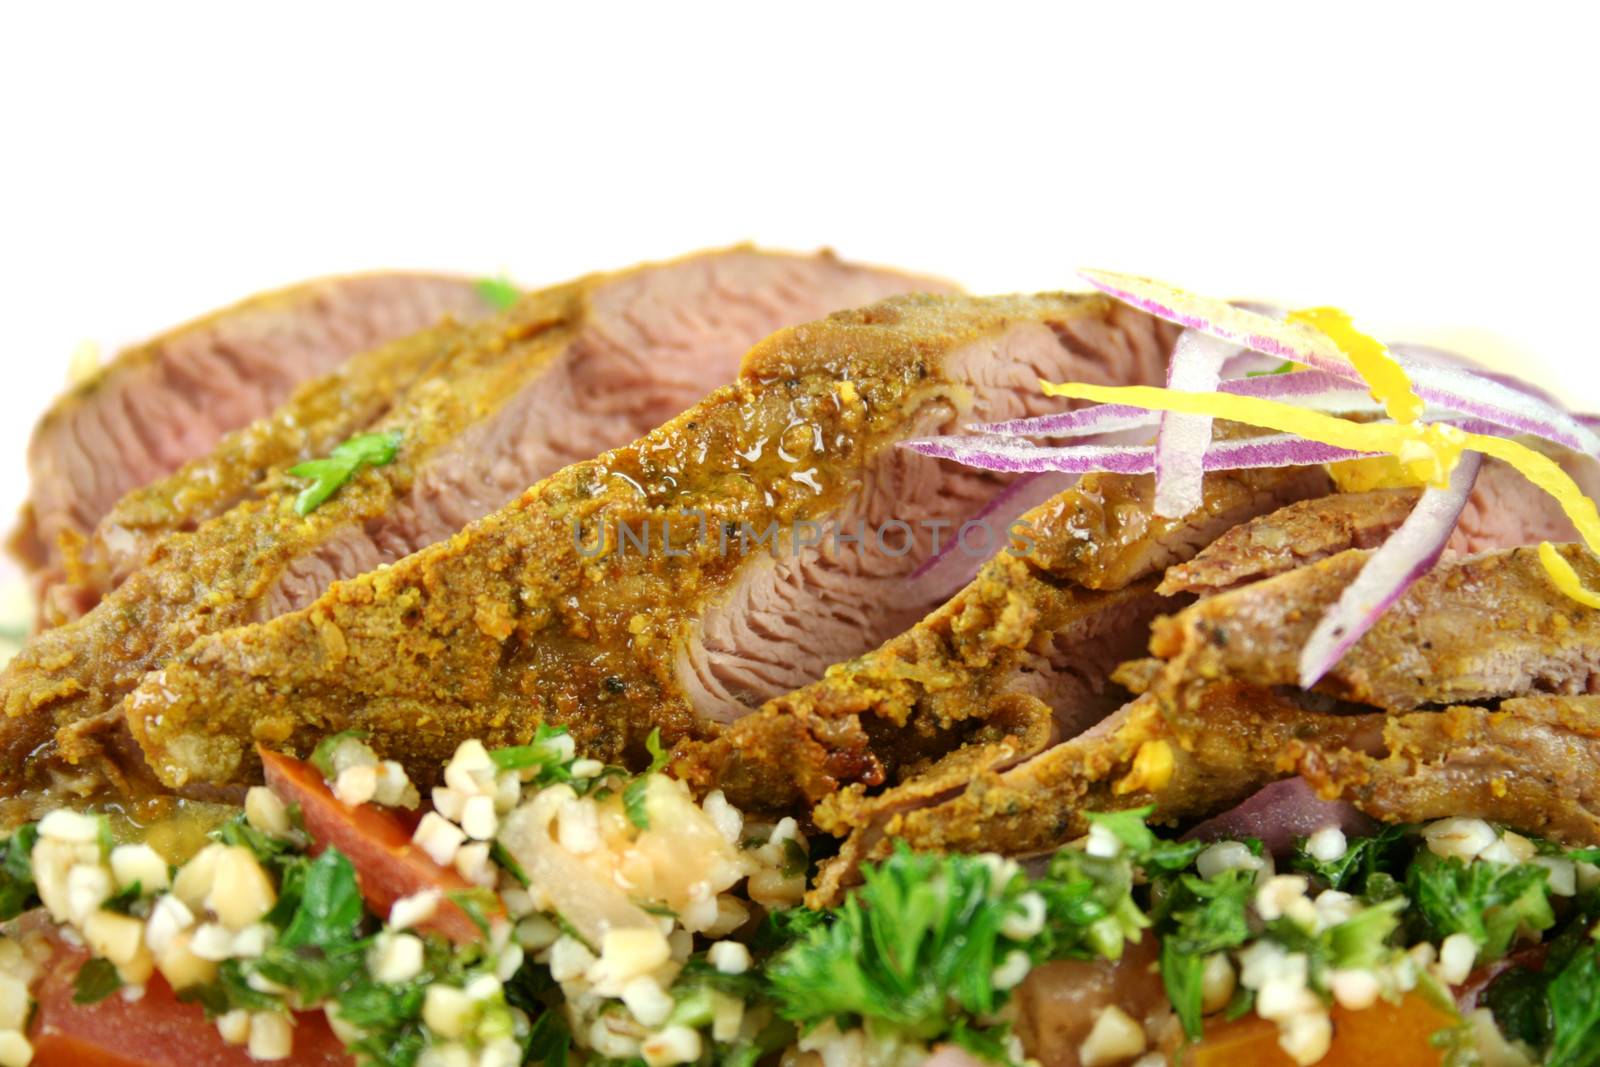 Sliced Middle Eastern lamb fillet with hommus and tabouleh.